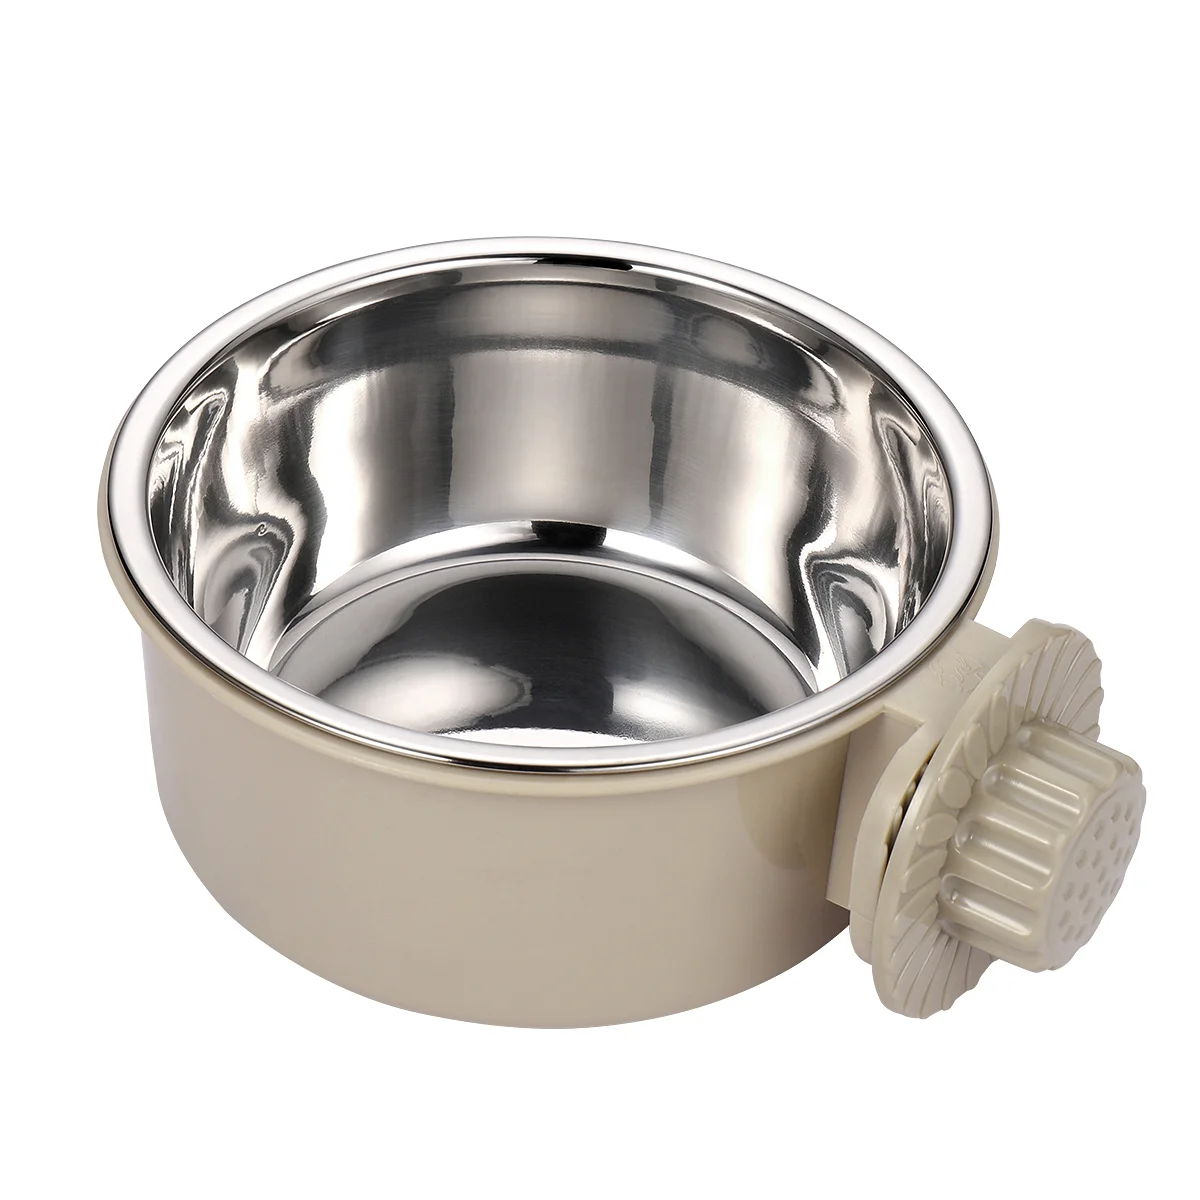 

Stainless Steel Hangers Dog Water Bowl Puppy Metal Bowls Cage Hanging Rabbit Feeder Coop Cup